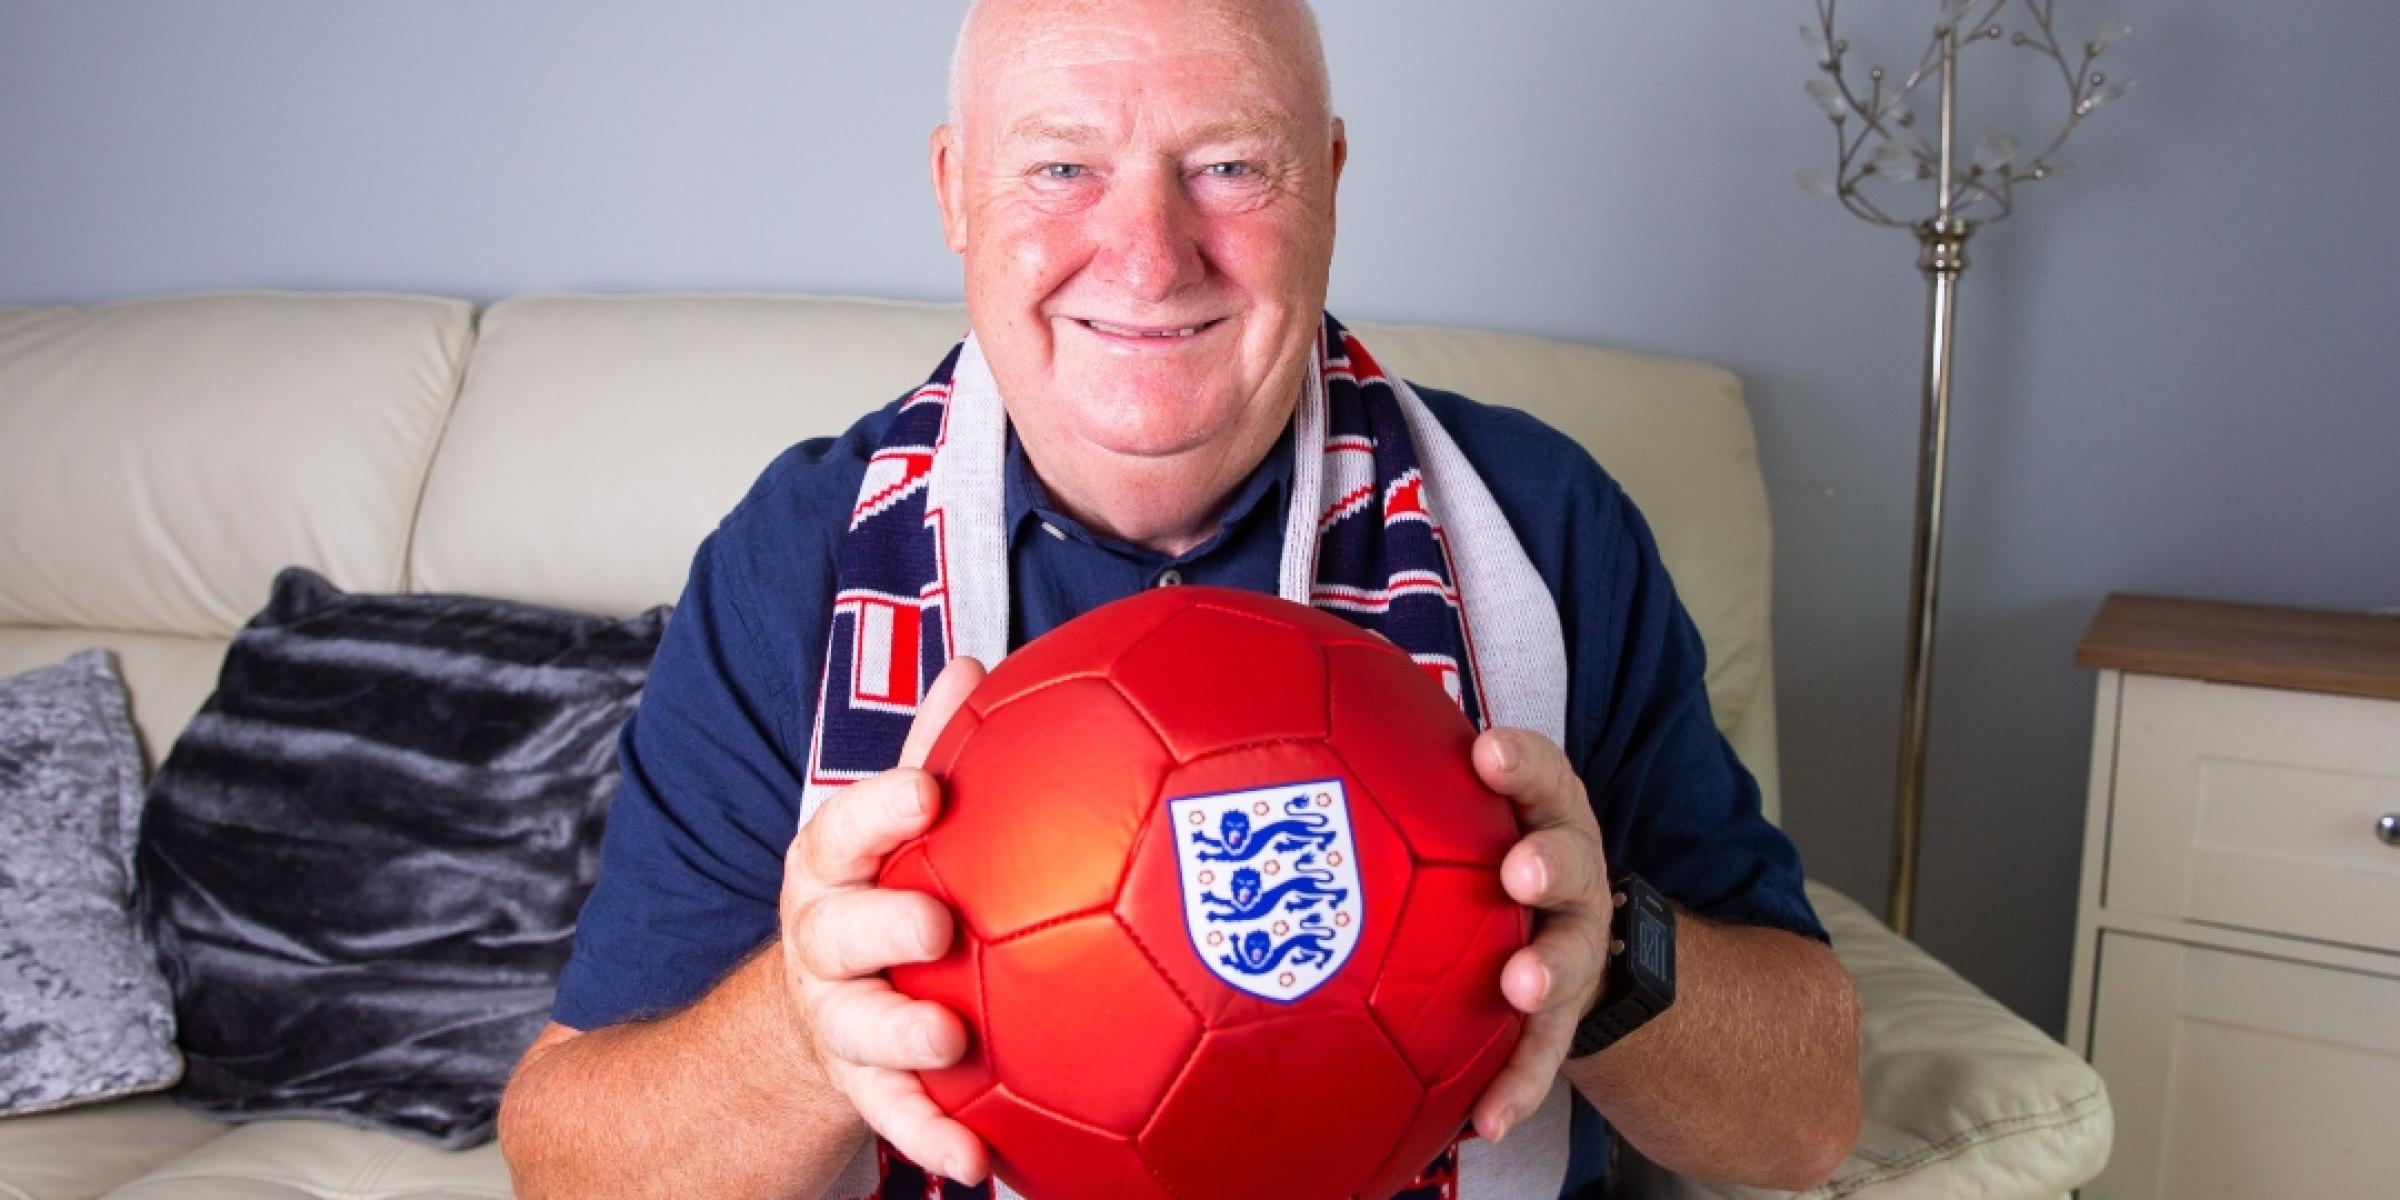 Tommy smiling, holding a red football